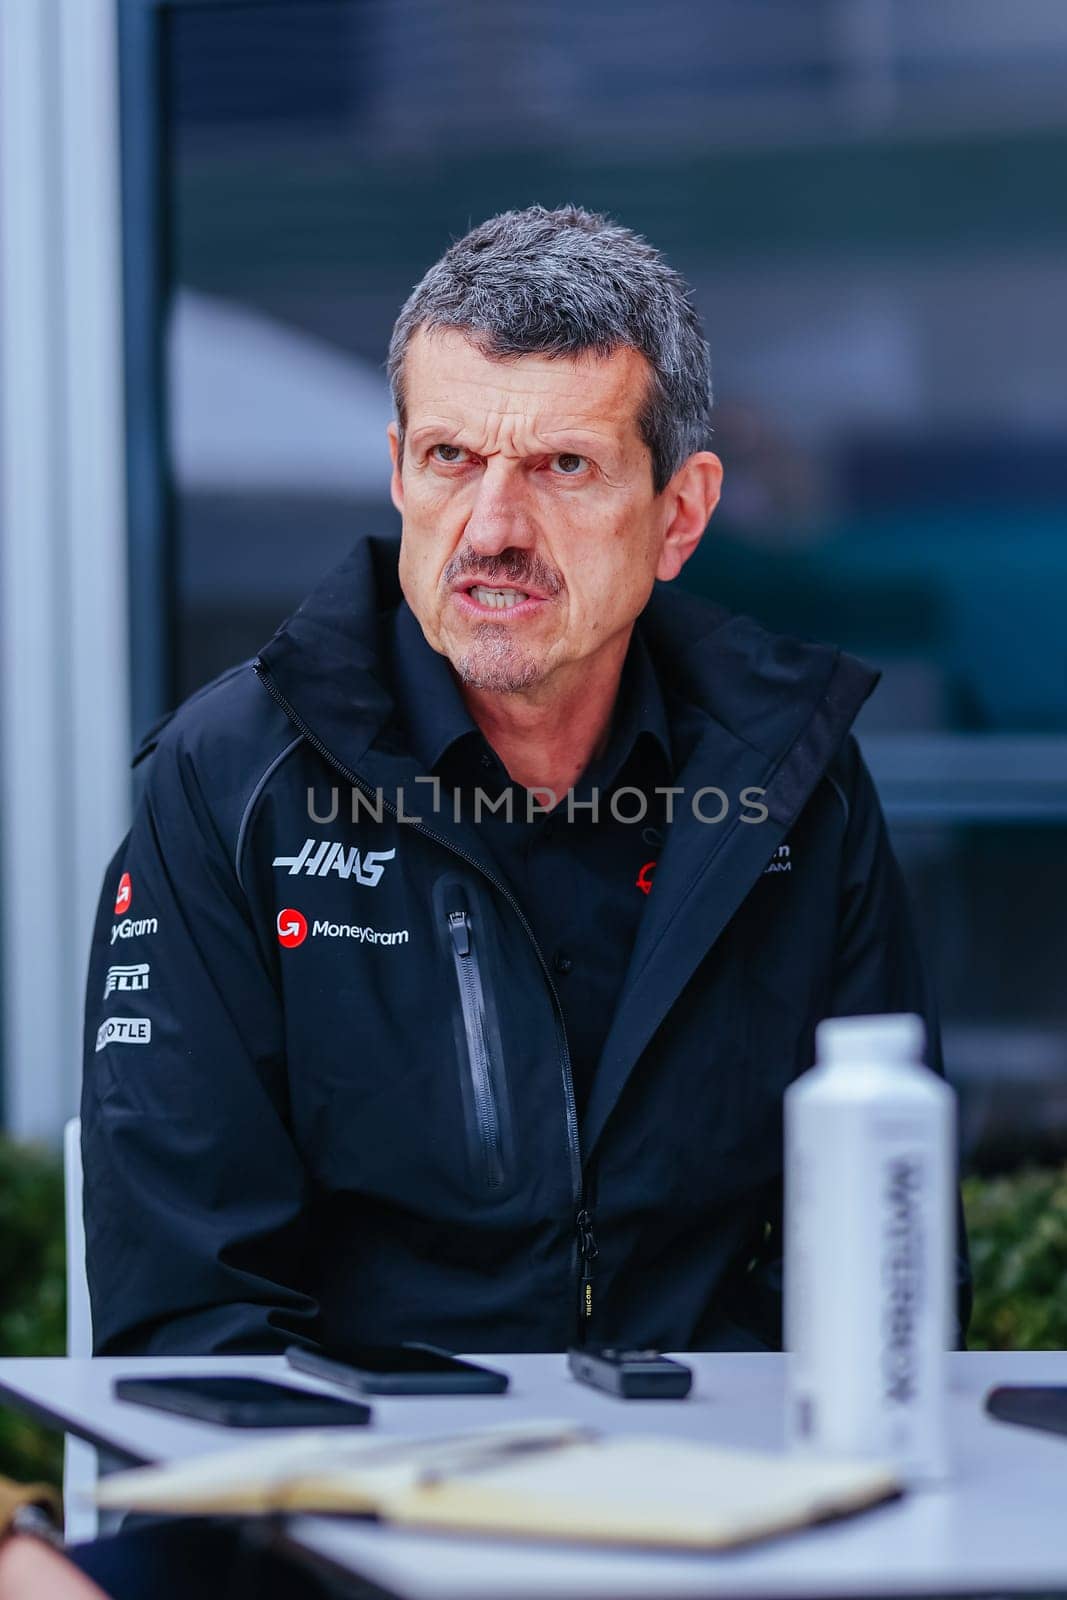 MELBOURNE, AUSTRALIA - MARCH 30: Guenther Steiner of MoneyGram Haas F1 Team at the 2023 Australian Formula 1 Grand Prix on 30th March 2023